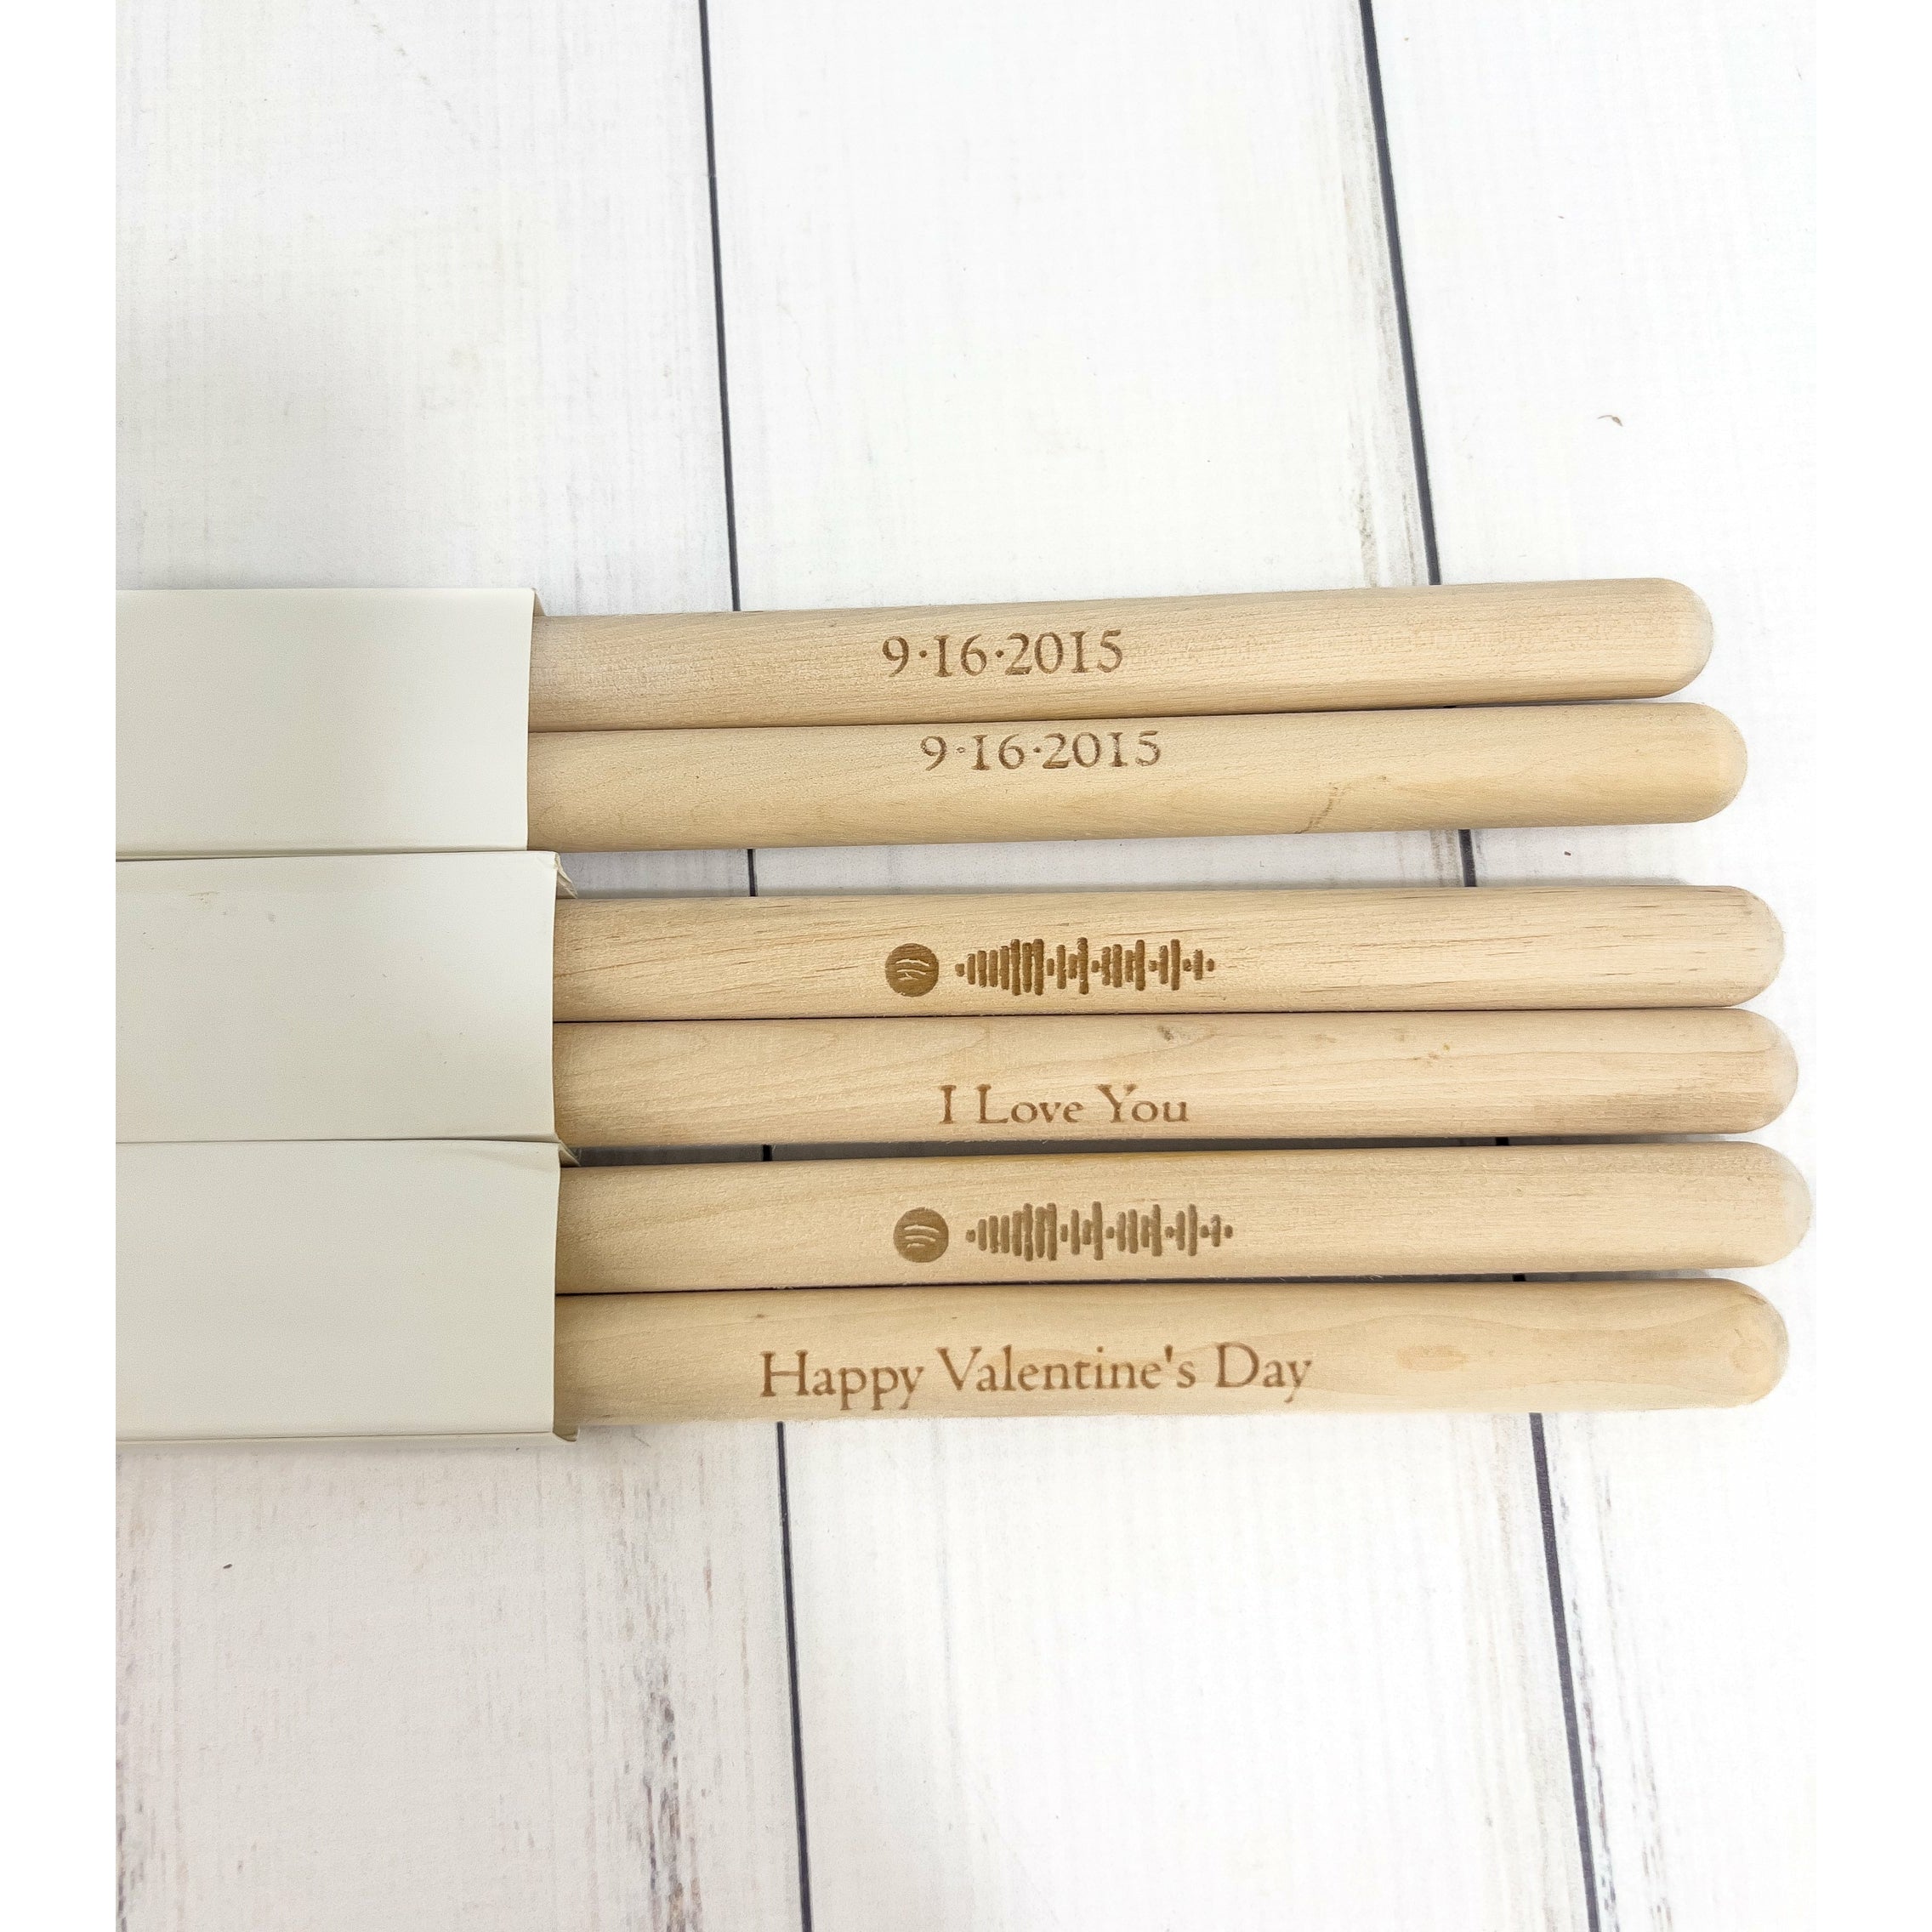 Personalized Drumsticks